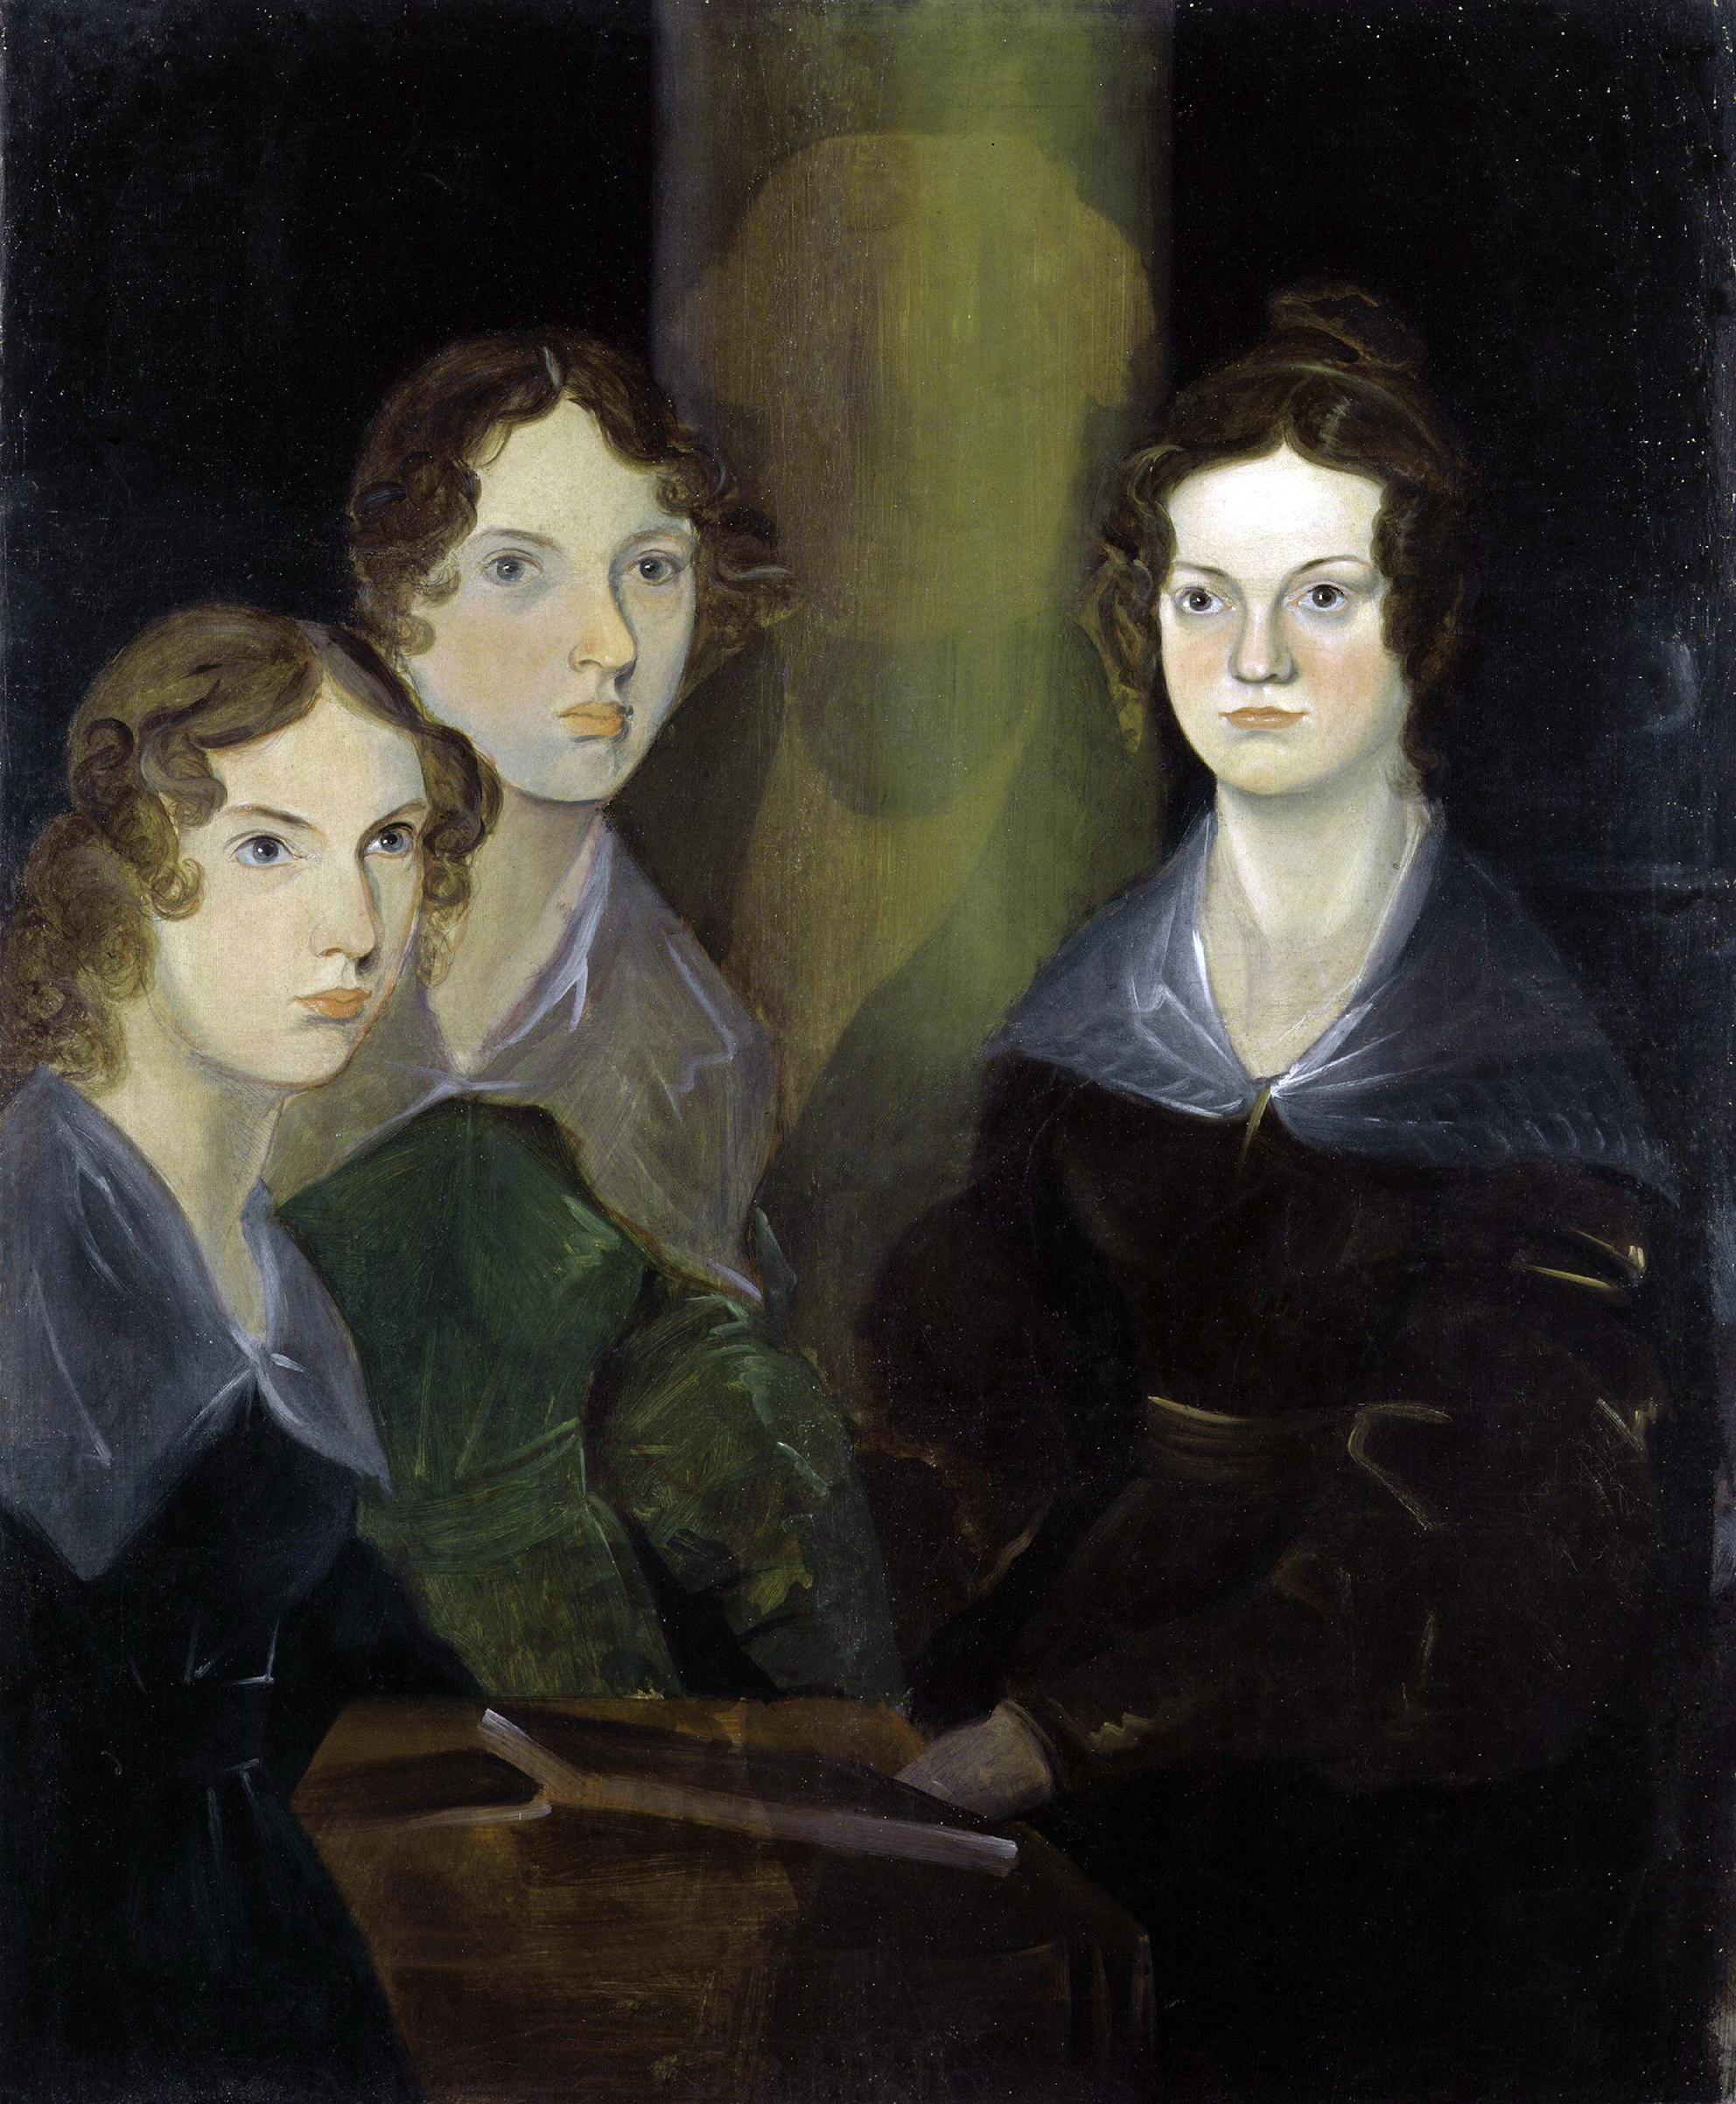 The Bronte Sisters by Patrick Branwell Bronte, circa 1834.